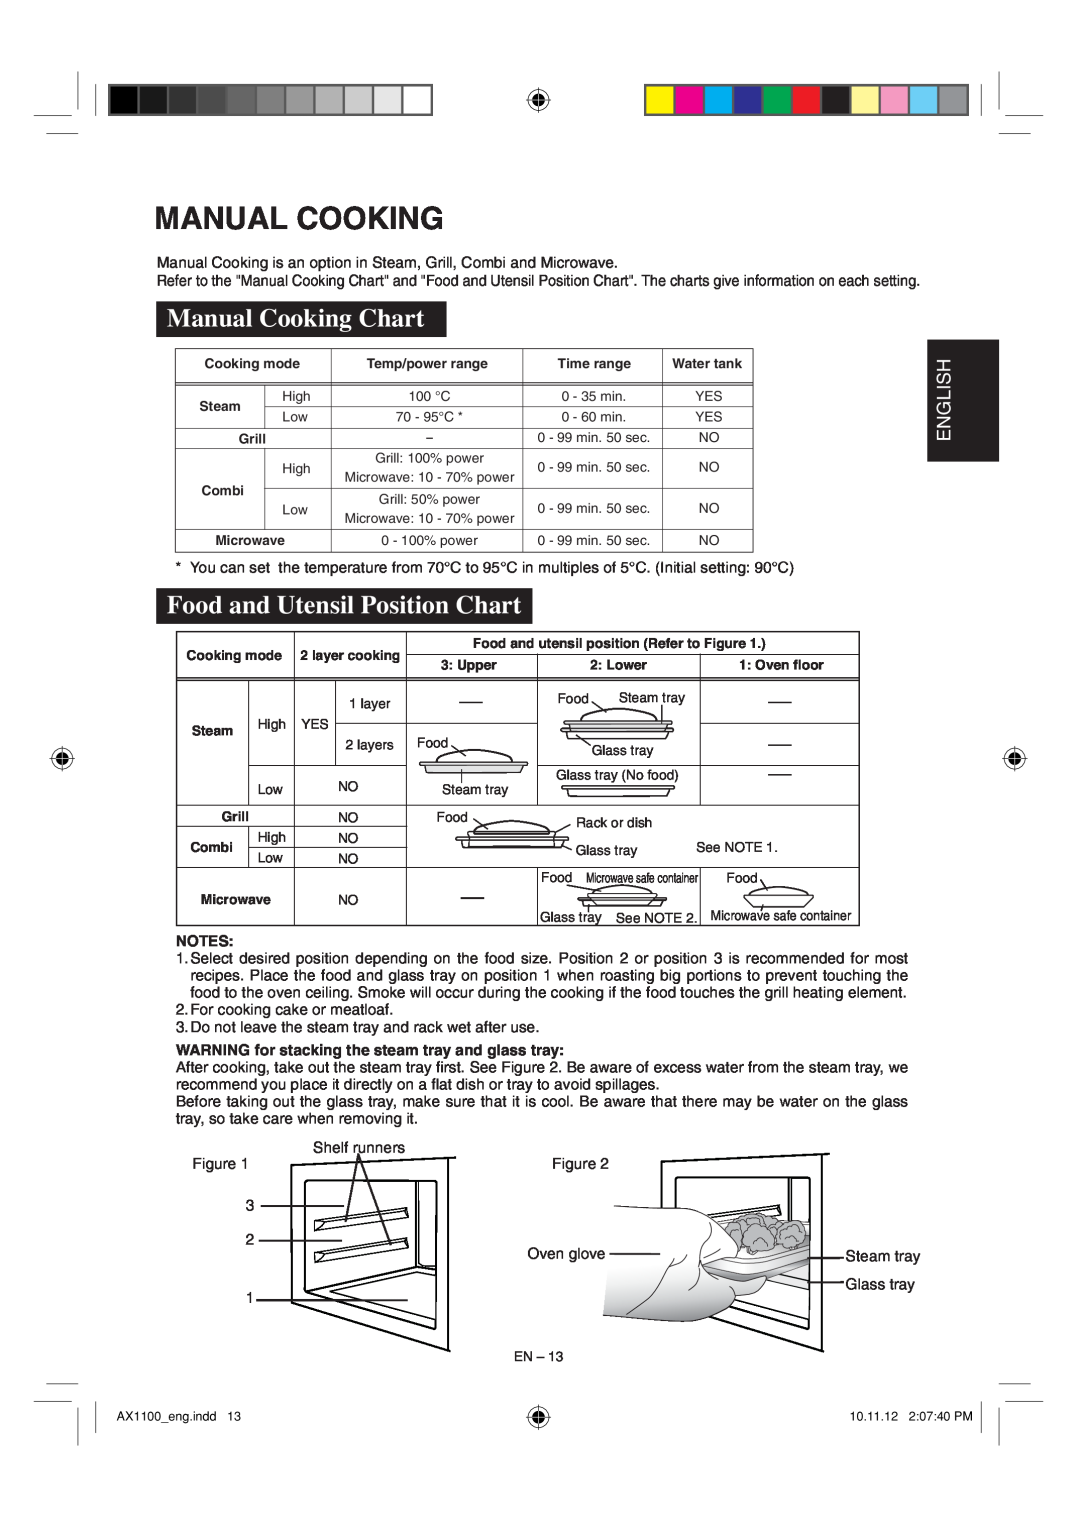 Sharp AX-1100 operation manual Manual Cooking Chart, Food and Utensil Position Chart, English 